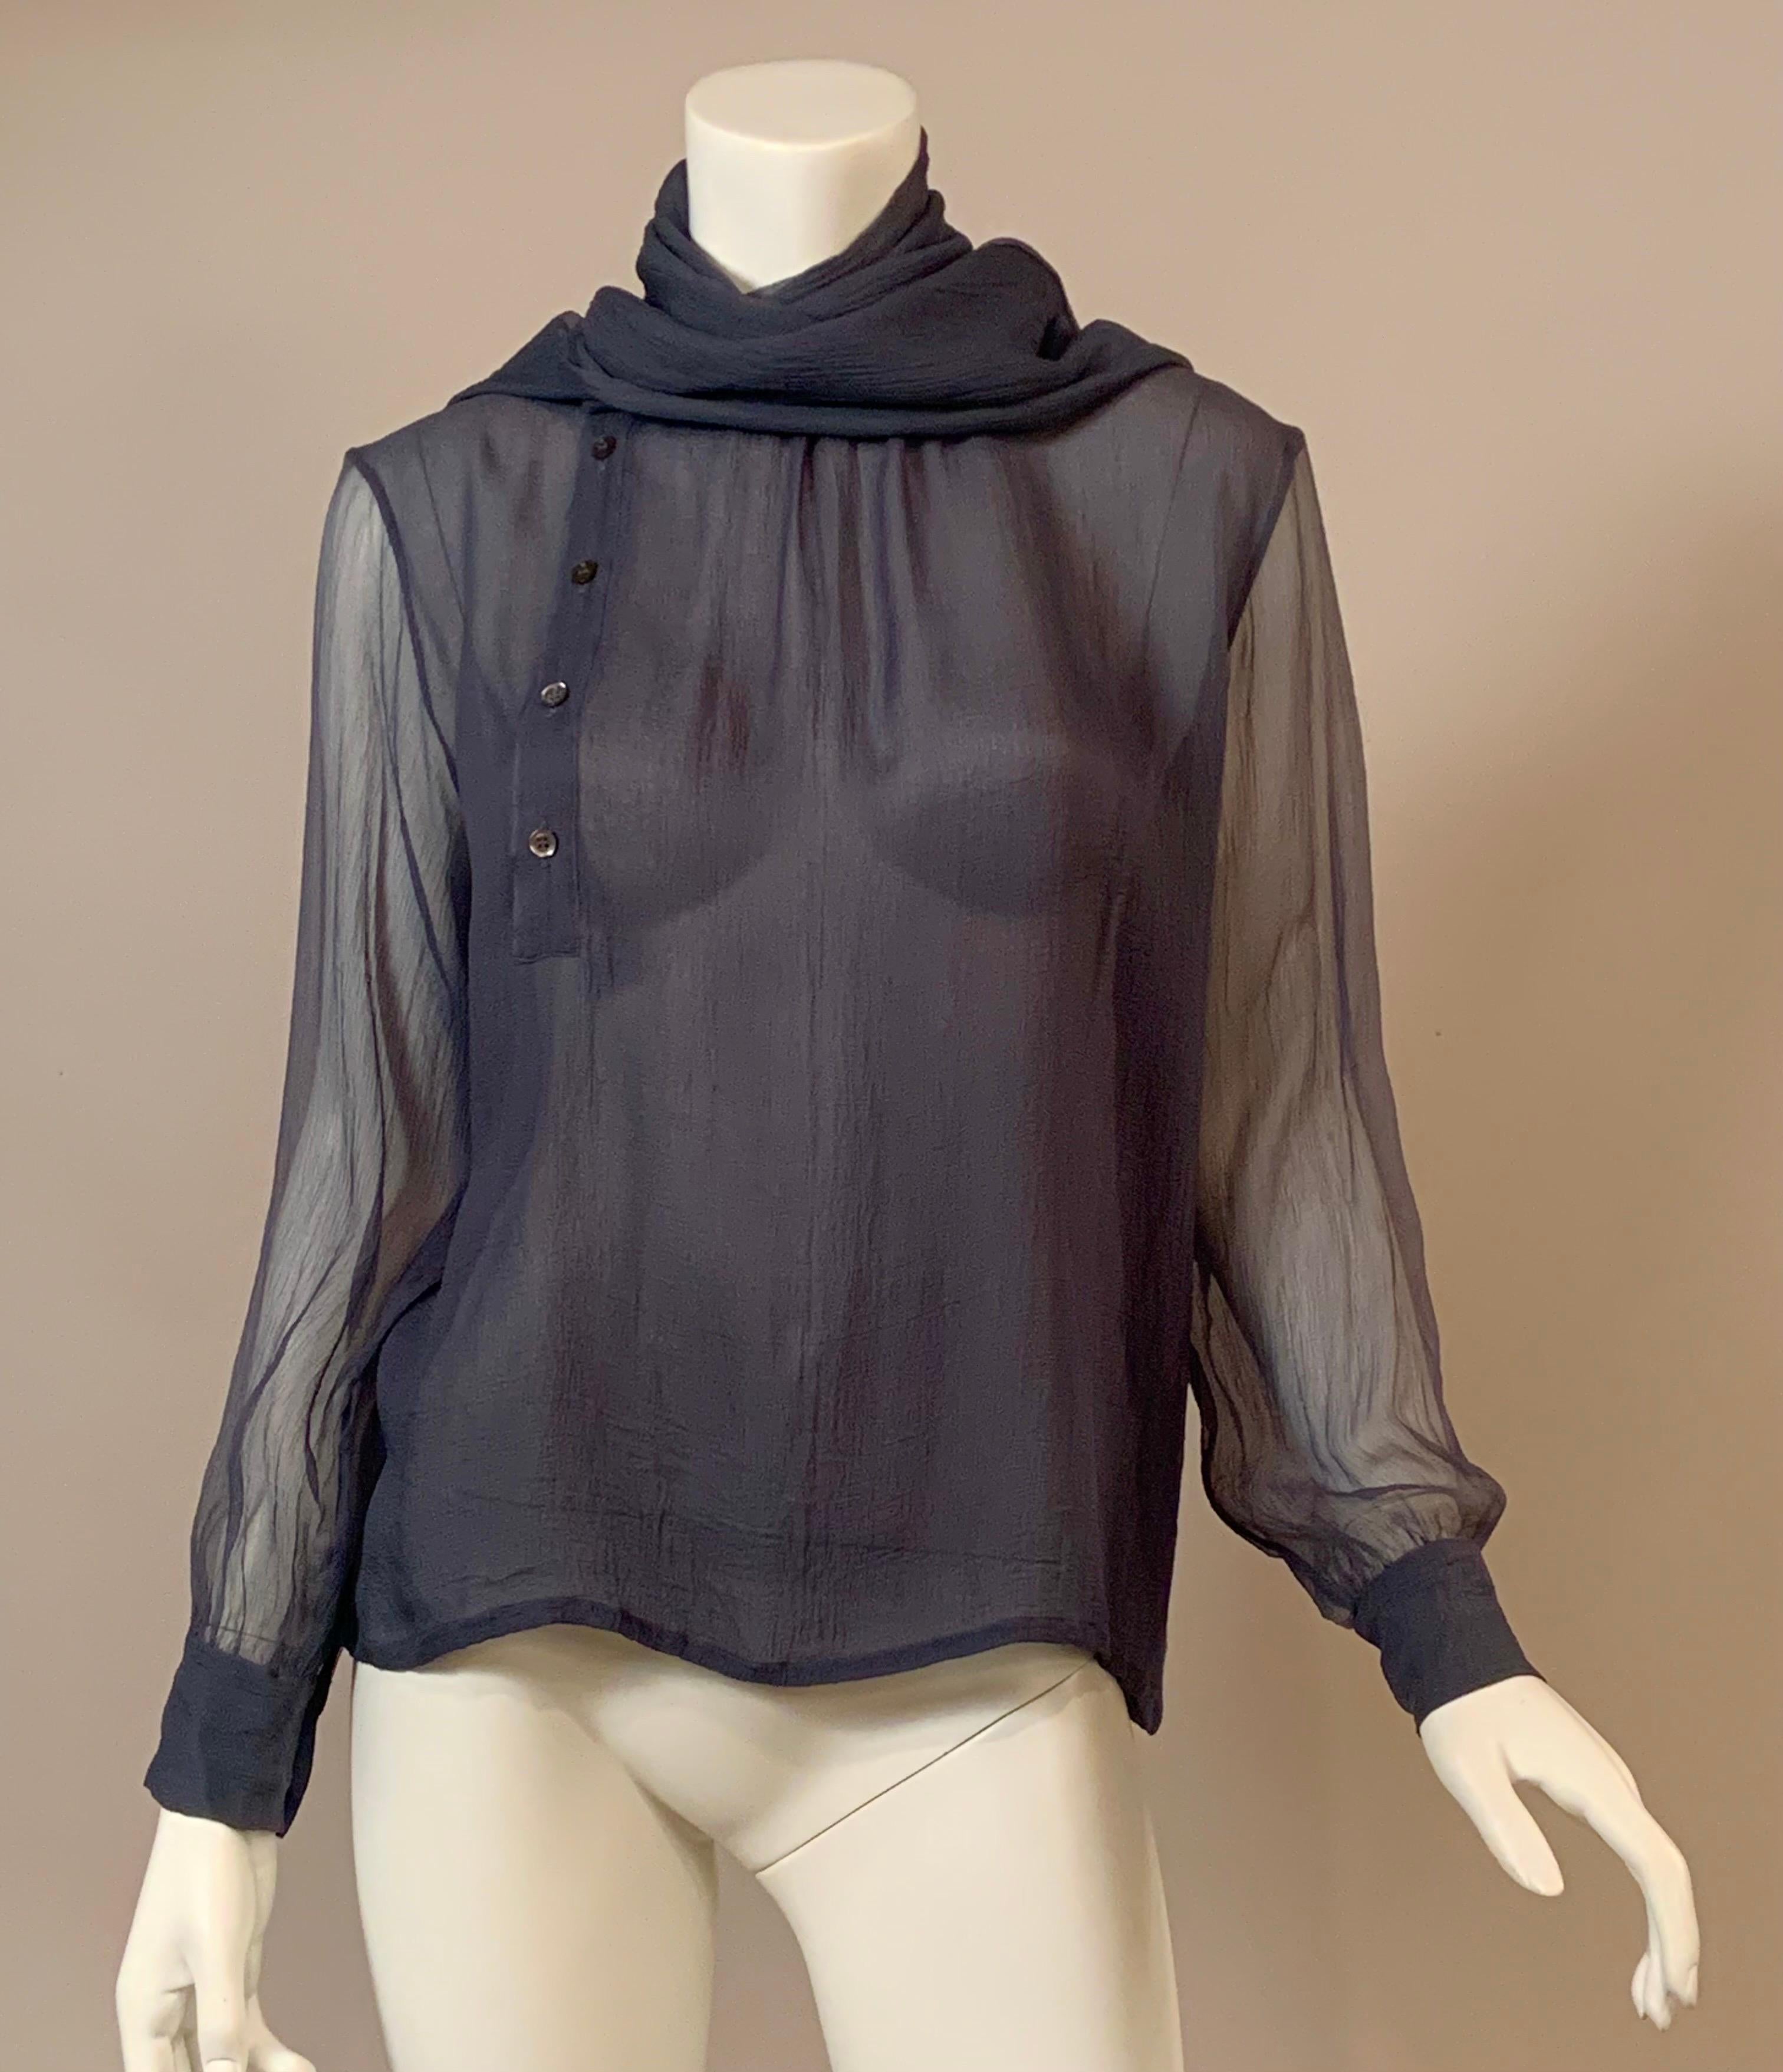 Yves saint Laurent designed this 1970's sheer  slate blue silk georgette blouse with an unusual neckline.  The blouse slips om over your head and buttons half way down the front, and to the right of the center.  This is covered by attached scarf if